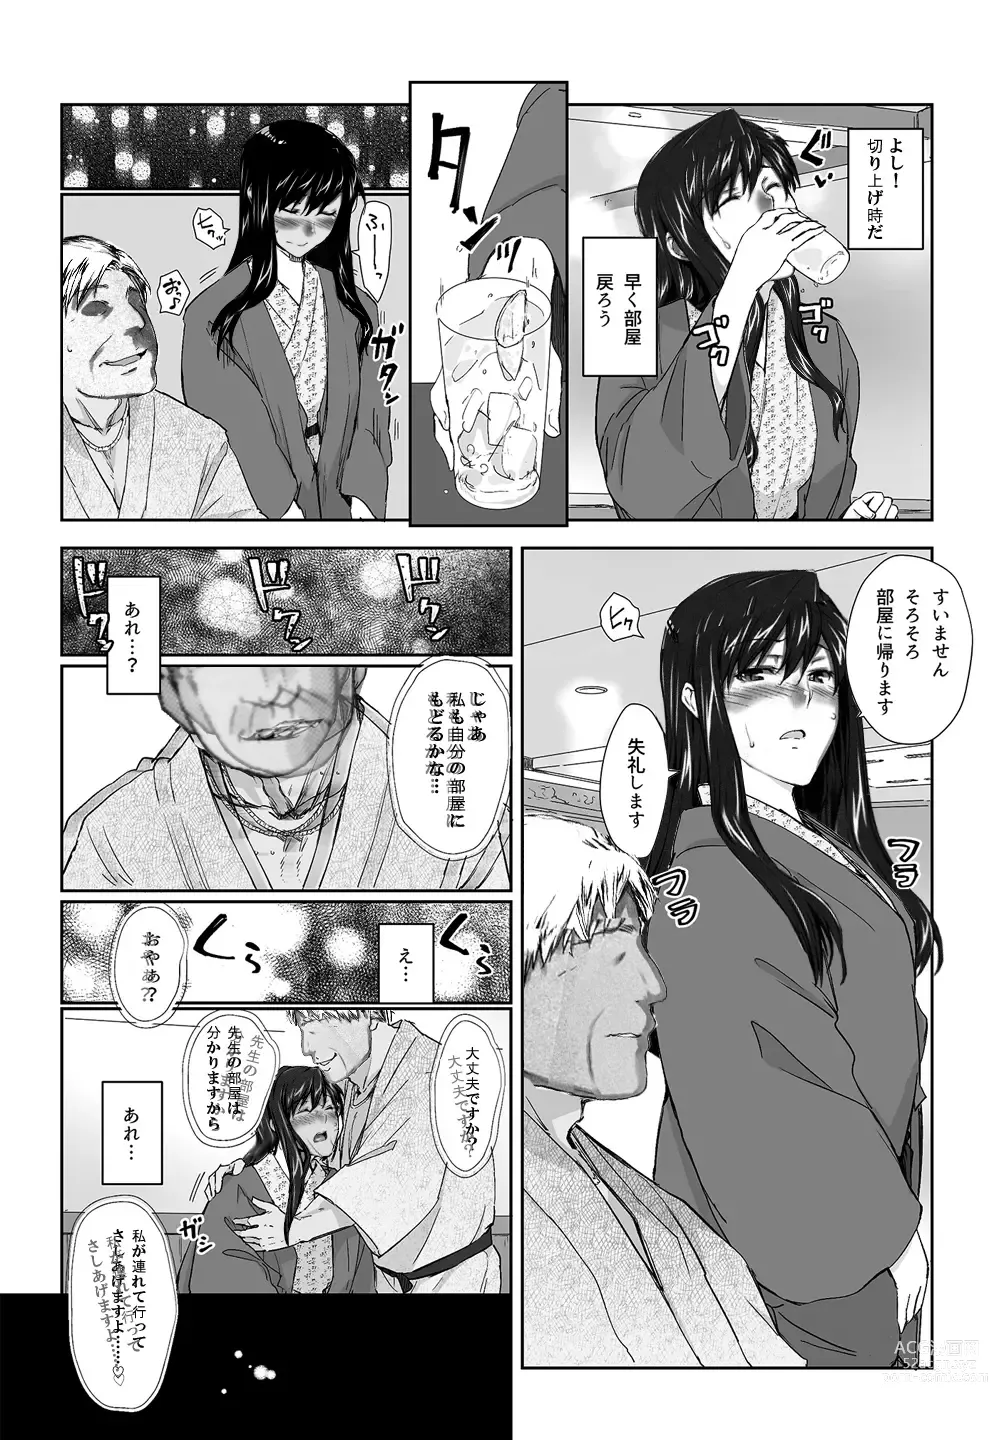 Page 5 of doujinshi Sakiko-san in delusion Vol.8 revised ~Sakiko-sans circumstance at an educational training Route3~ (collage) (Continue to “First day of study trip” (page 42) of Vol.1)